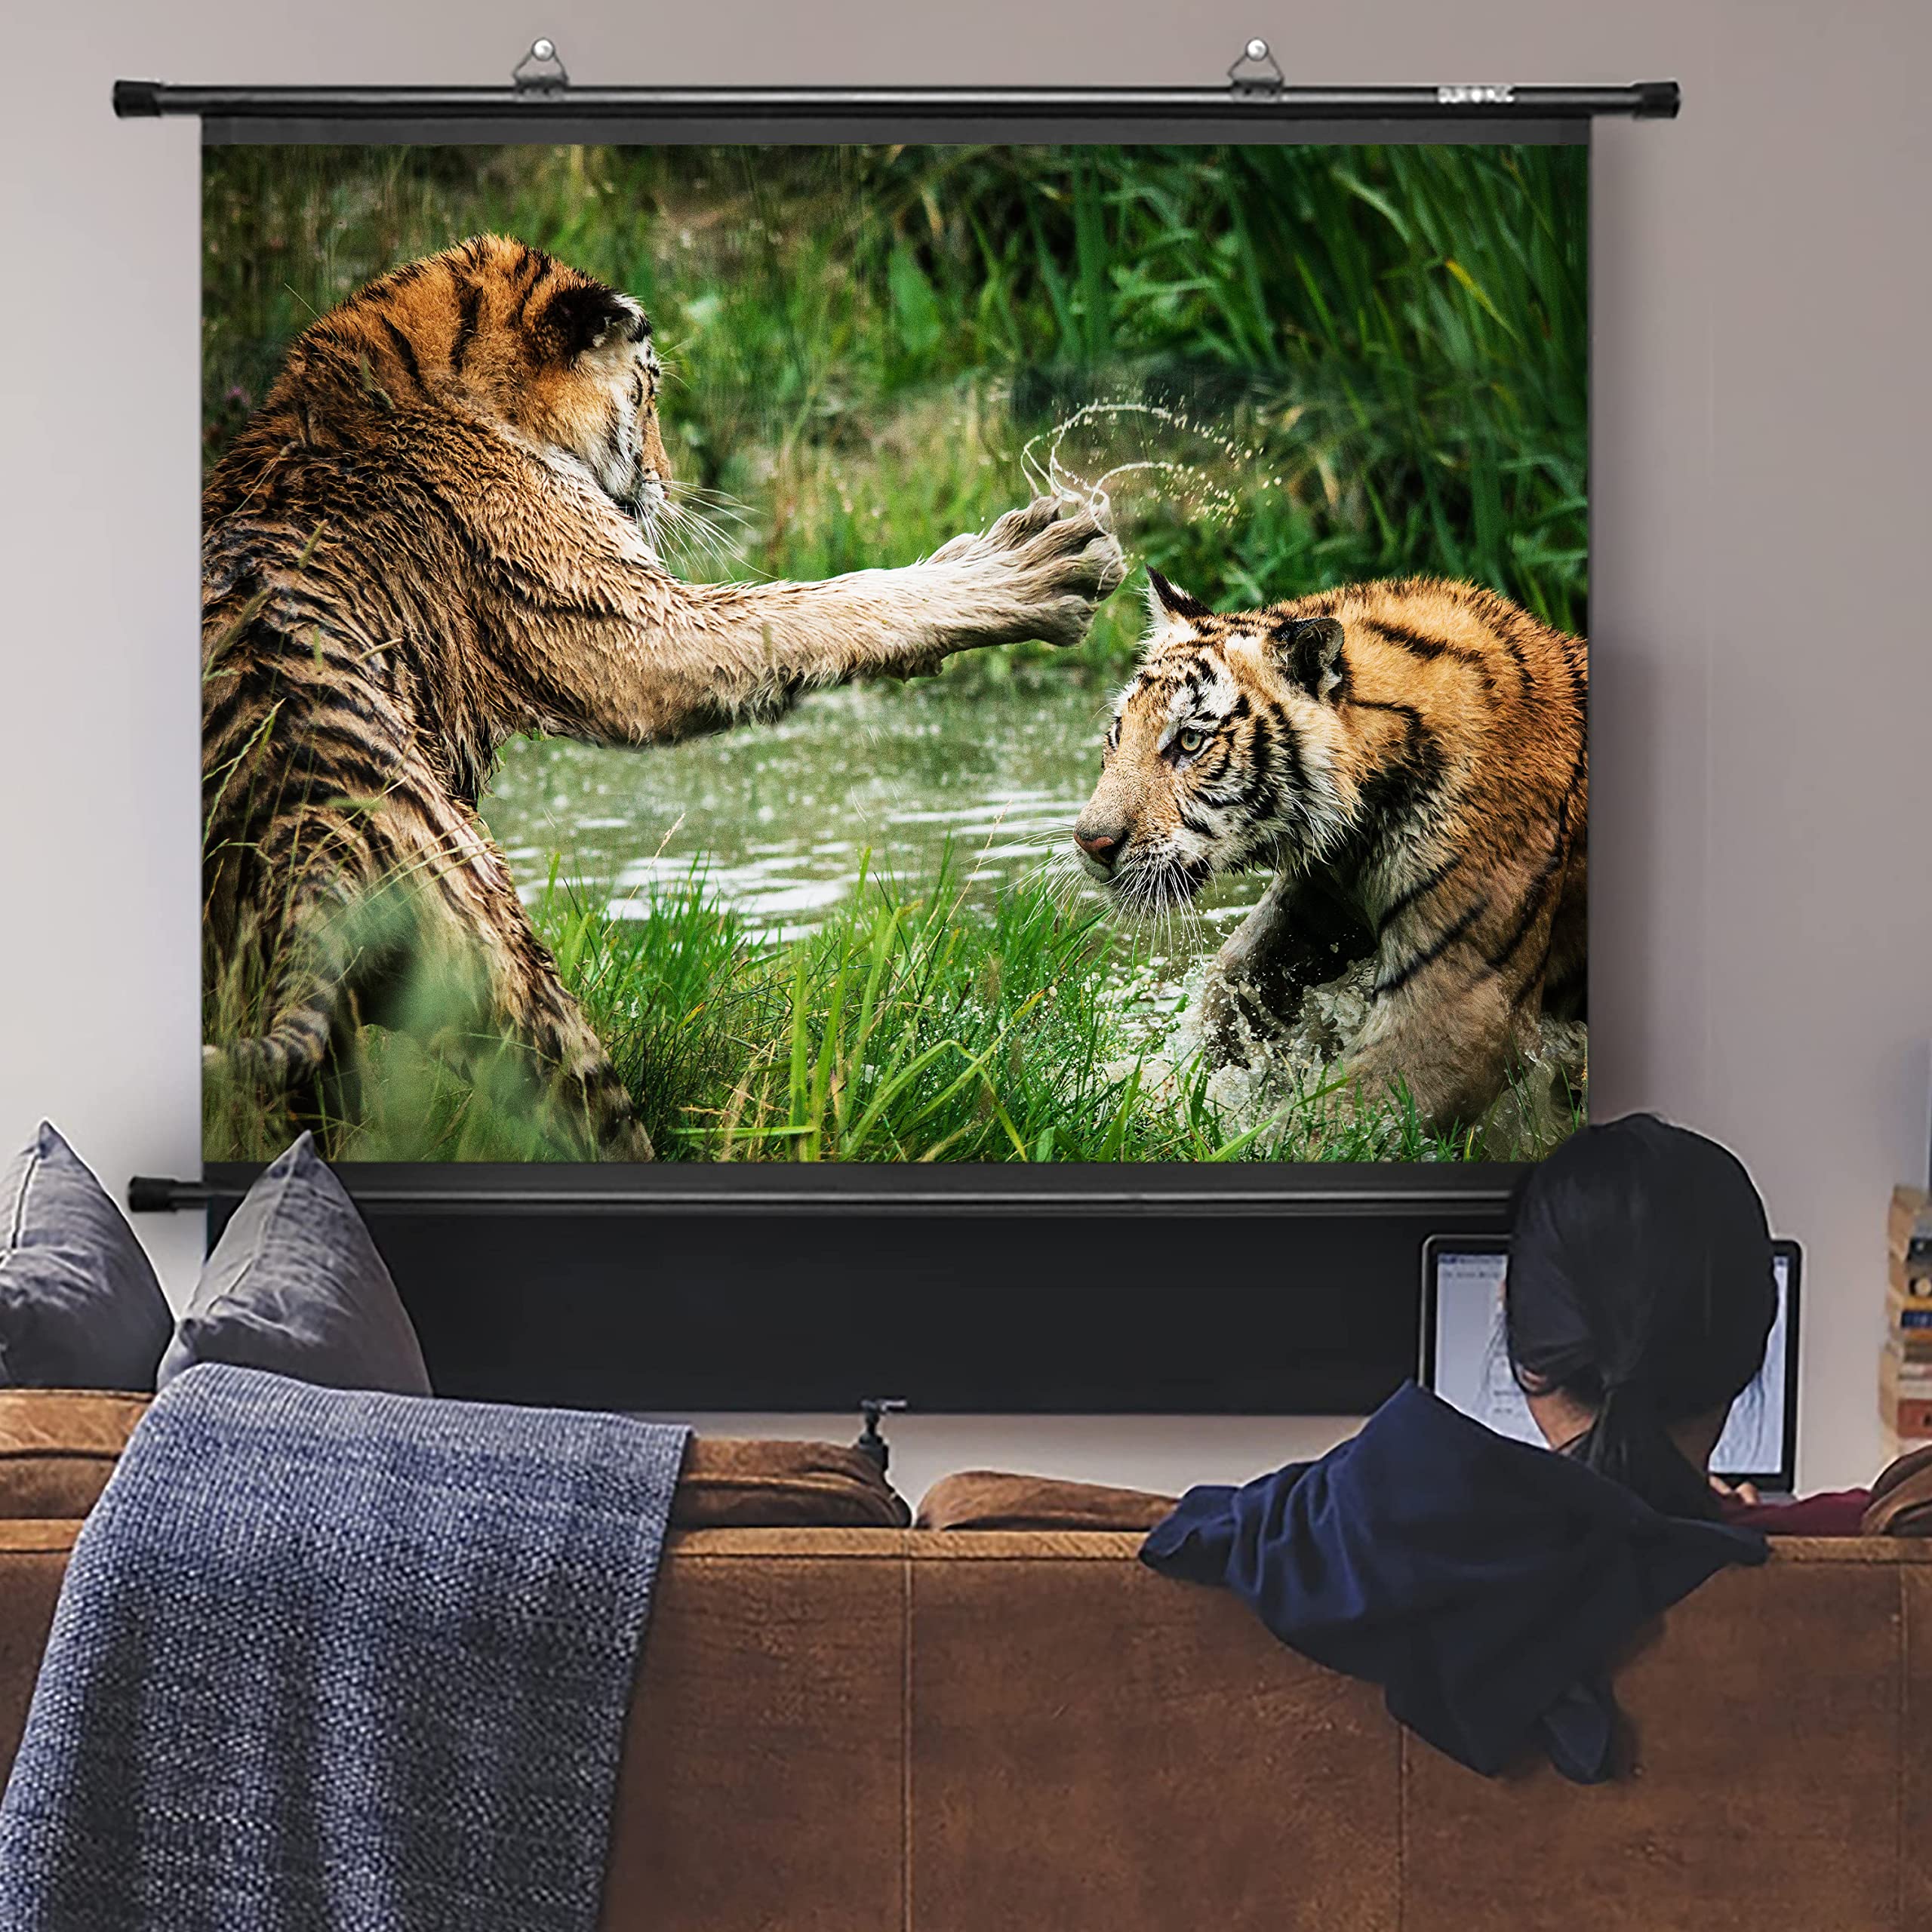 Duronic Projector Screen BPS100/43 | 100’’ Bar Projection Screen Size 203x152cm 4:3 Ratio Matt White +1 Gain | High Definition Wall or Ceiling Mountable | Home Cinema School Office